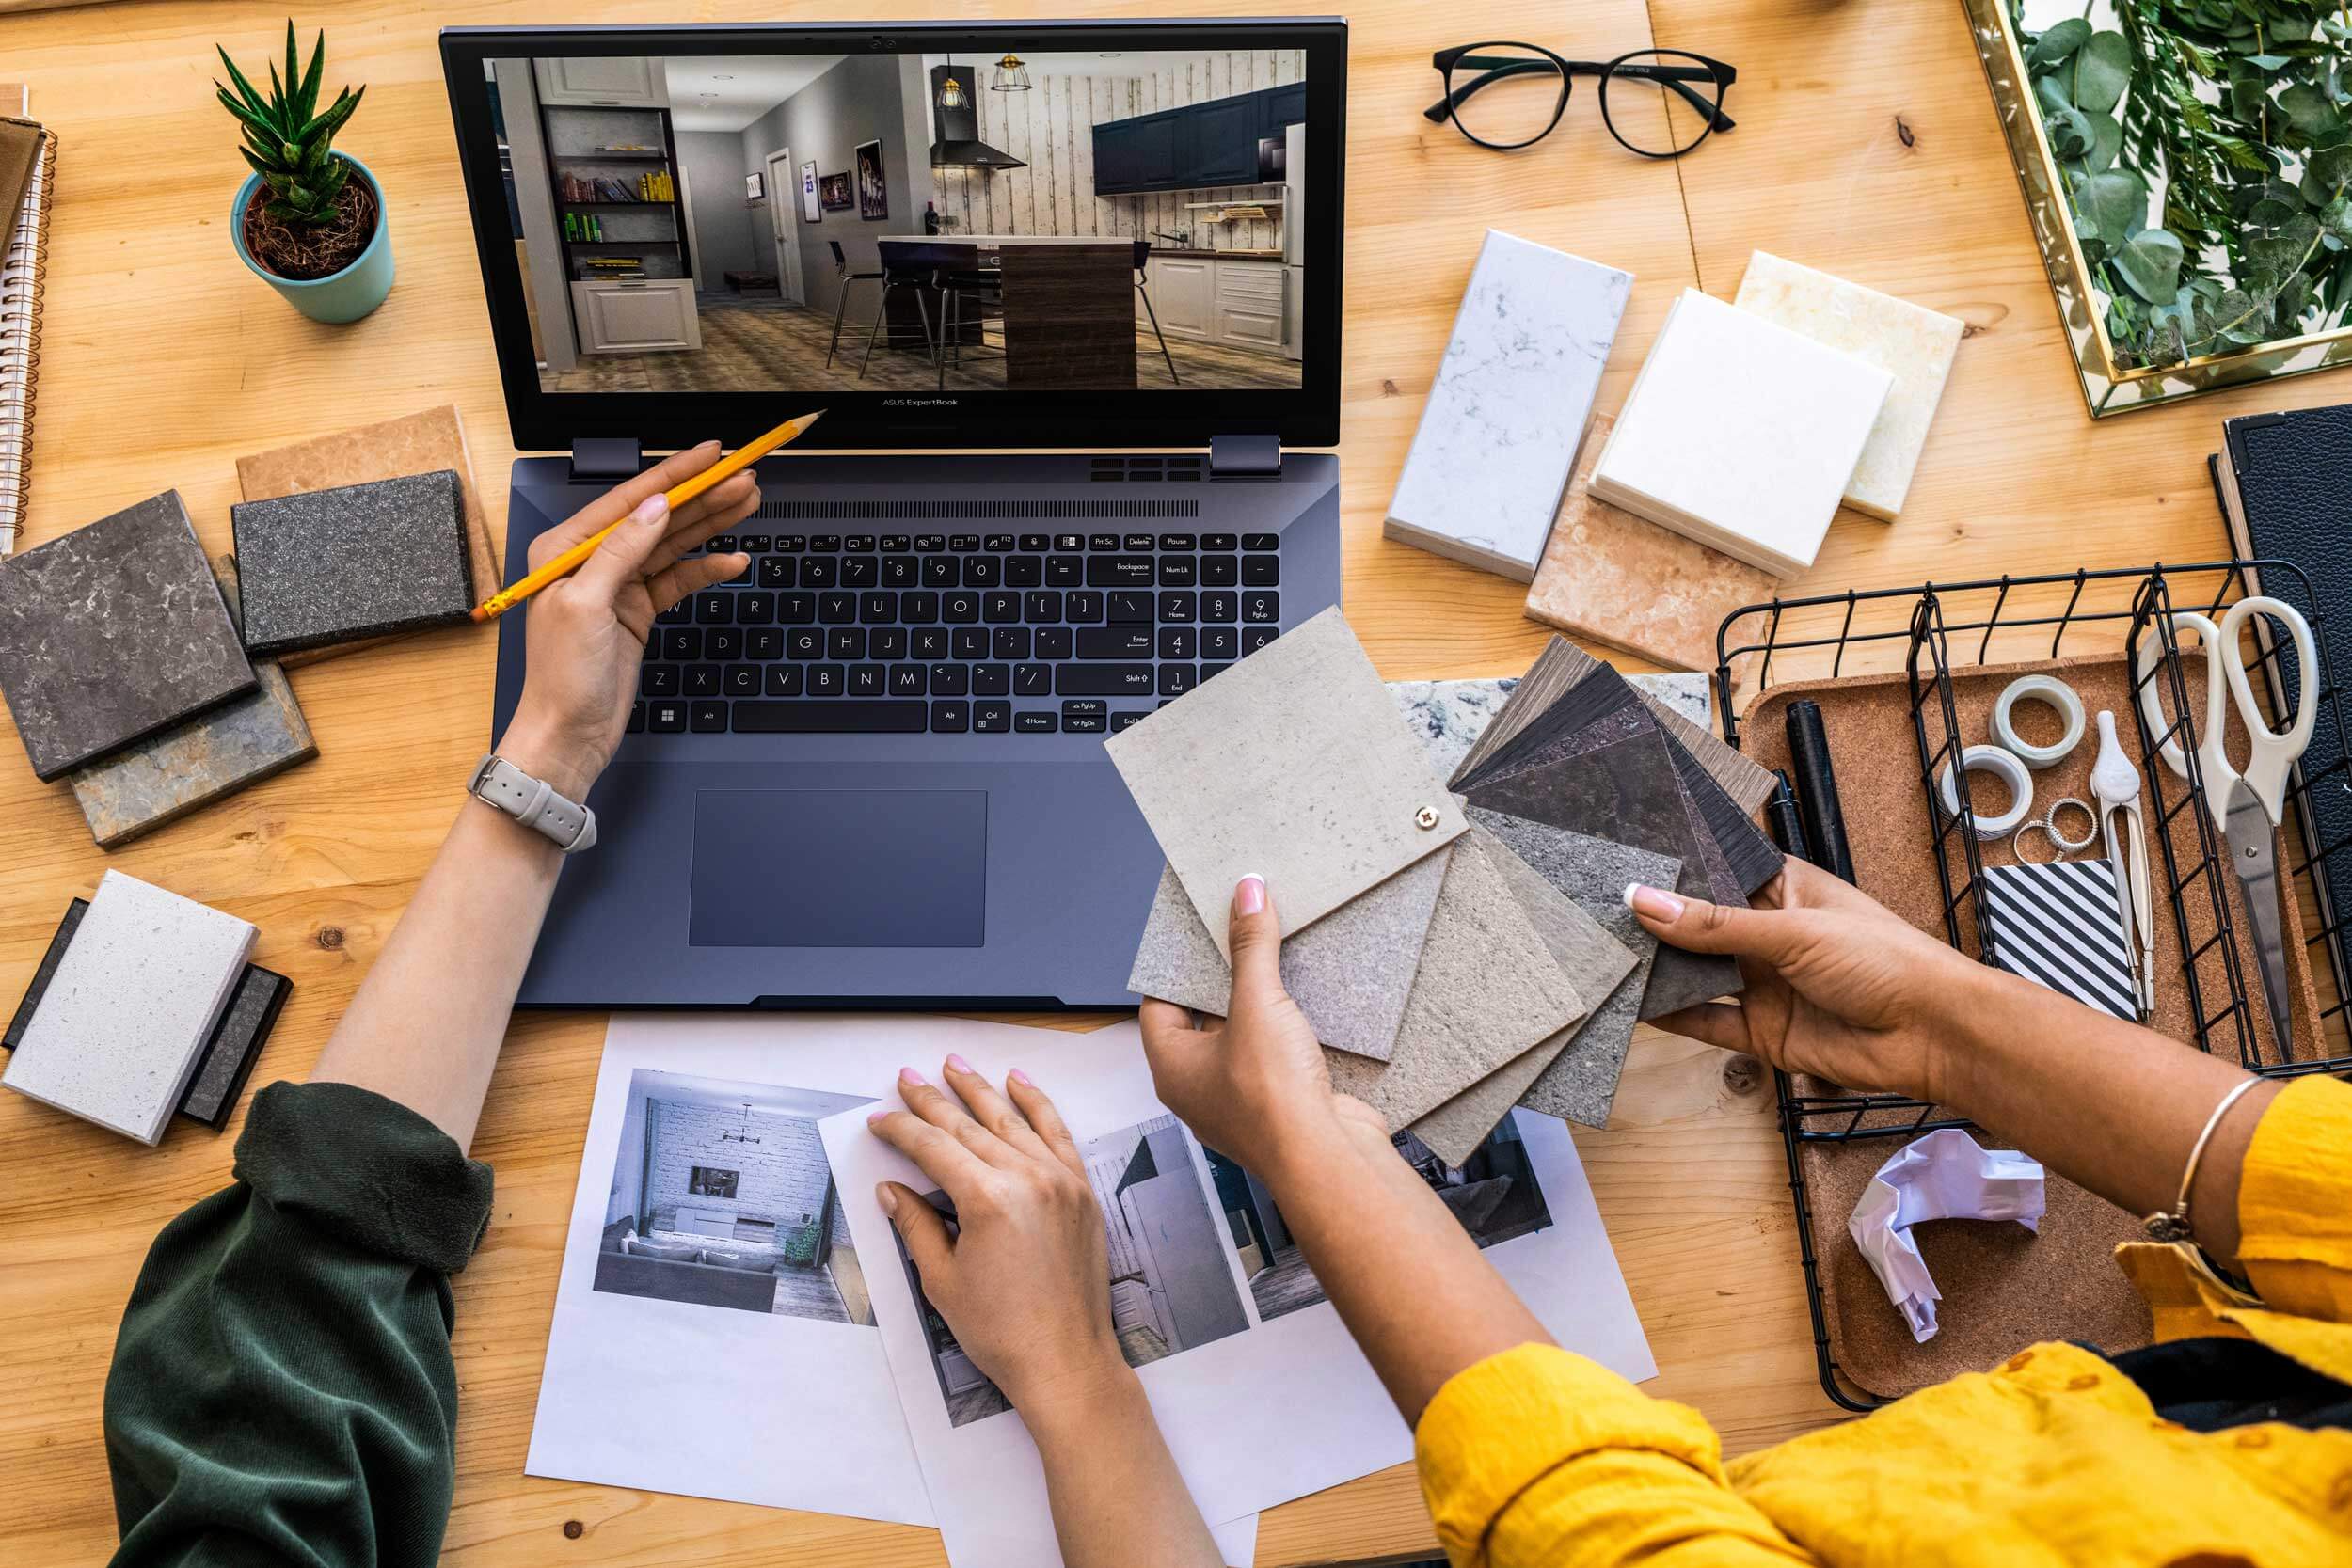 The ASUS ExpertBook B6 Flip is the world’s first flippable mobile workstation designed specifically to complement the workflow in Architecture, Engineering, and Construction (AEC) sector that runs 3D and CAD applications and industry-leading software solutions like 3ds Max, MicroStation, and Vectorworks.